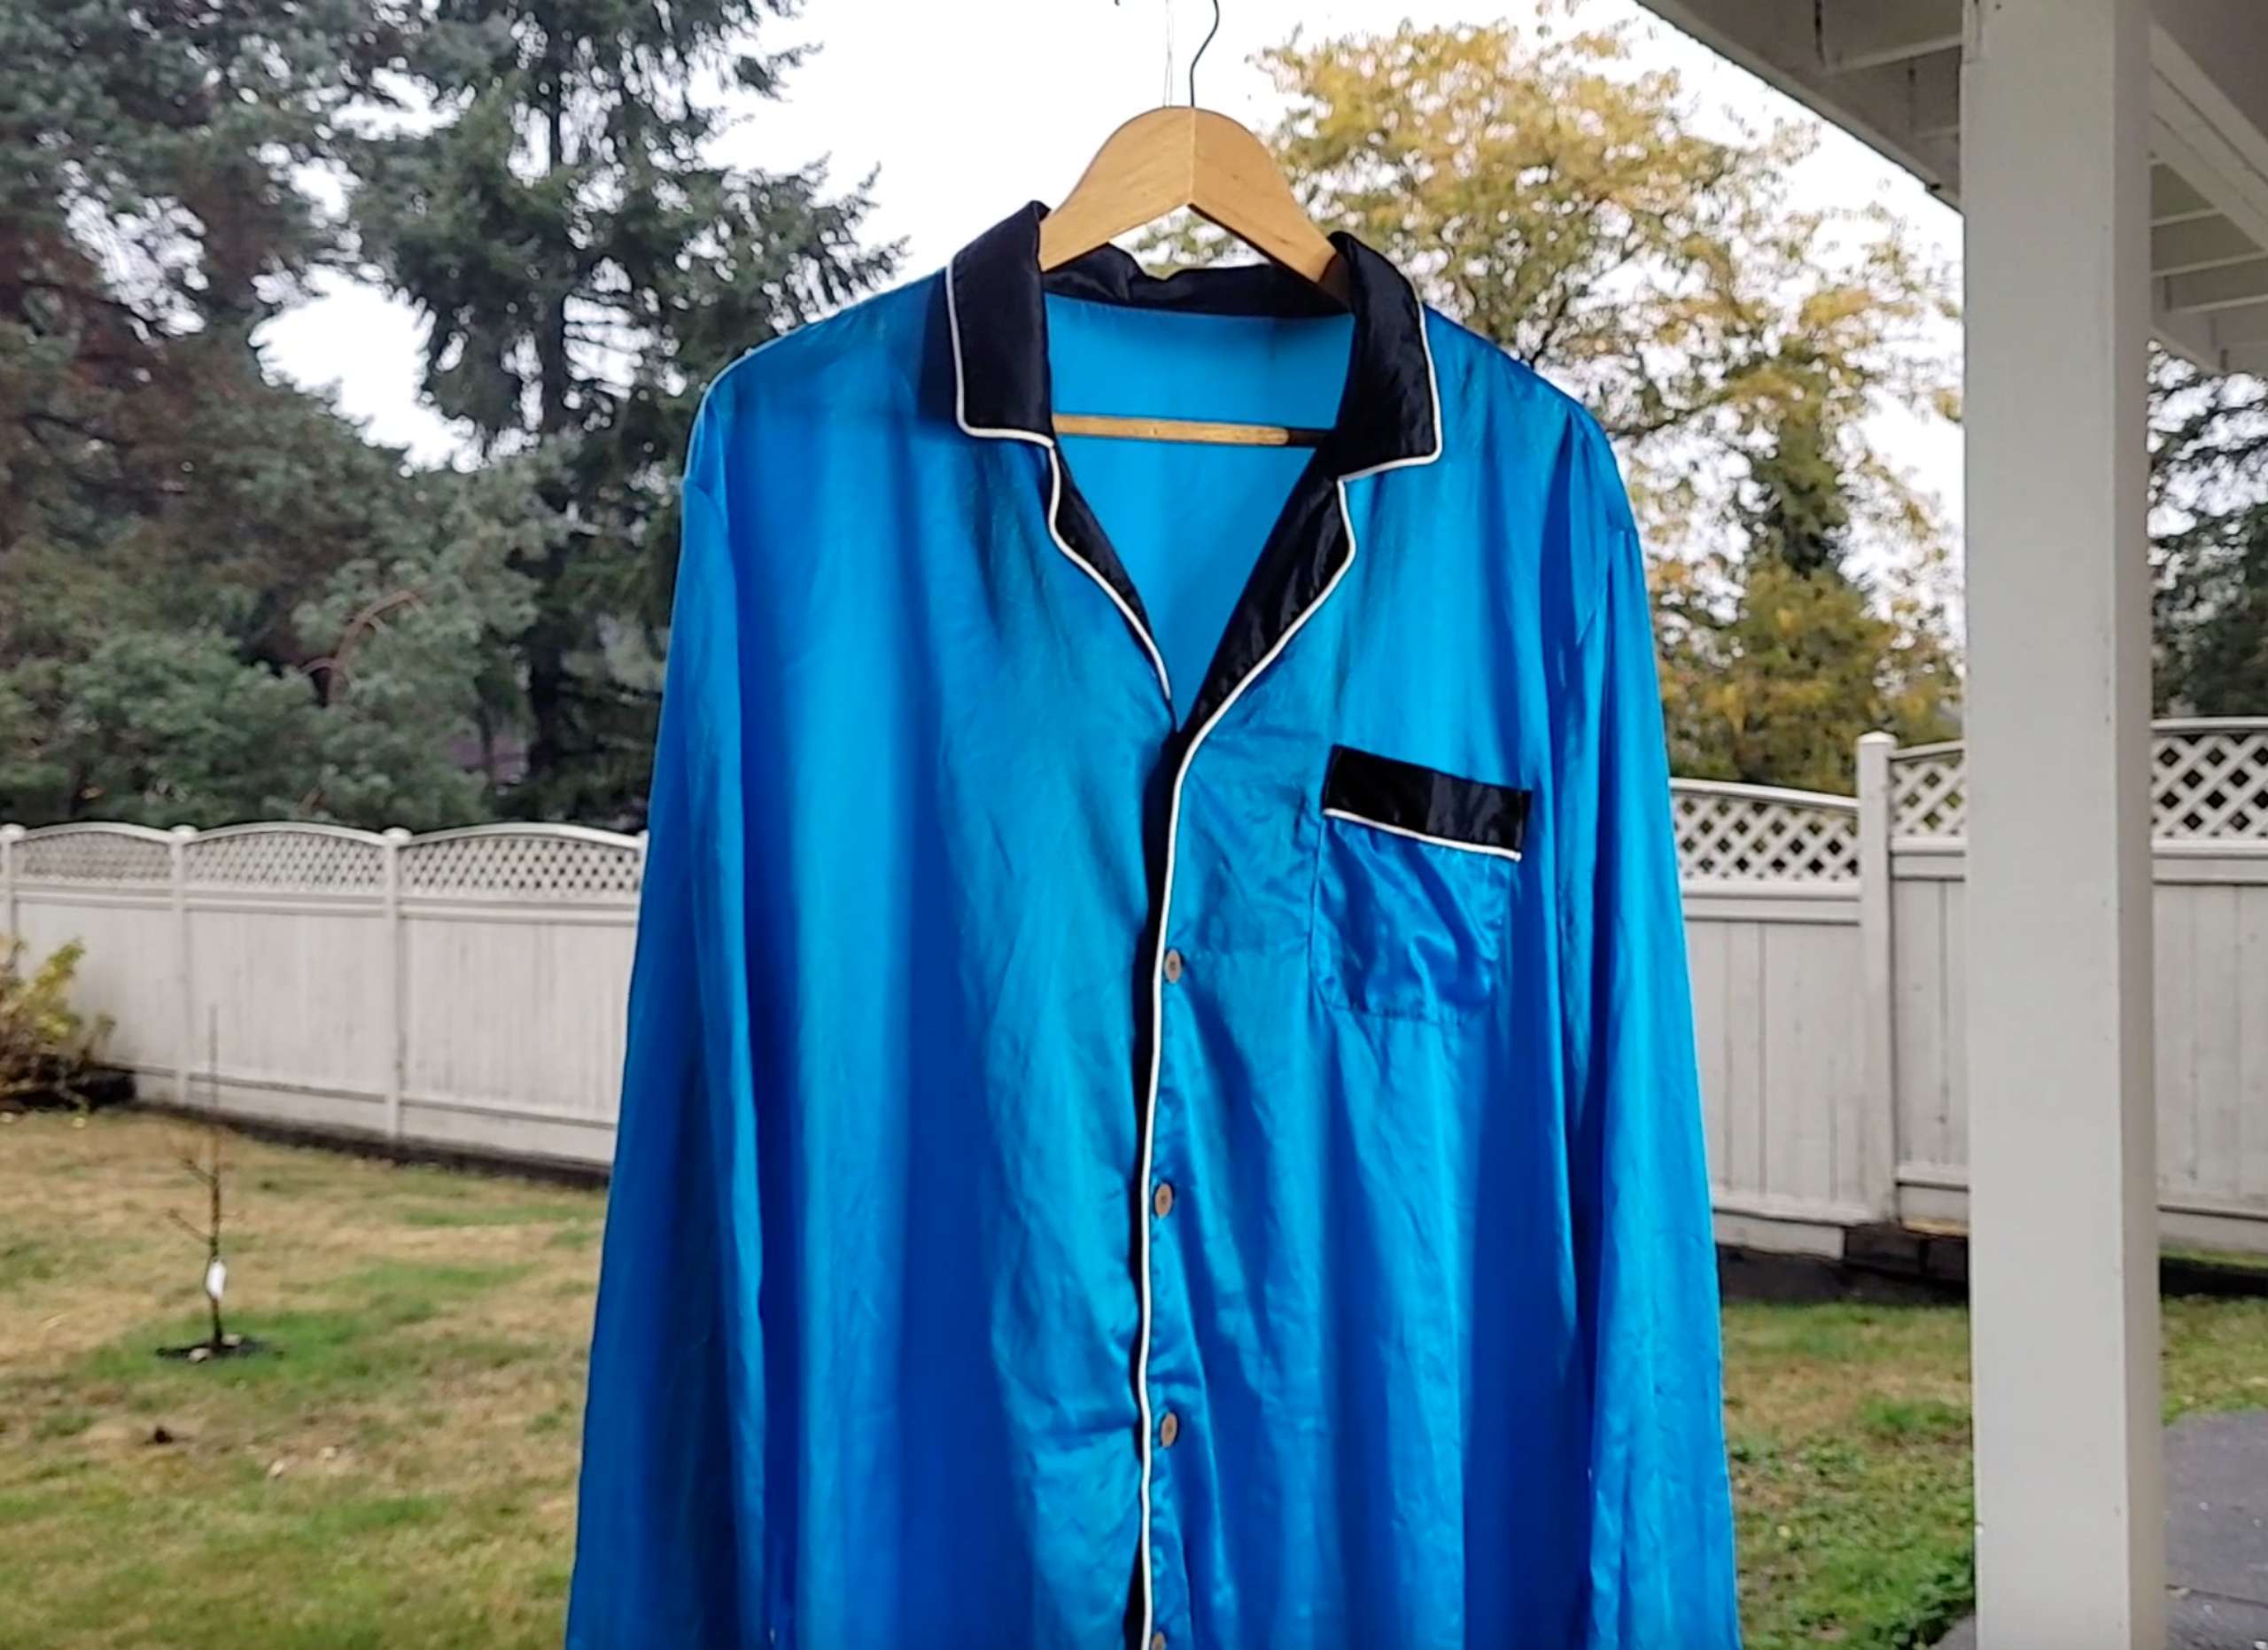 a picture of a blue silk shirt hanging outside in the shade to air dry